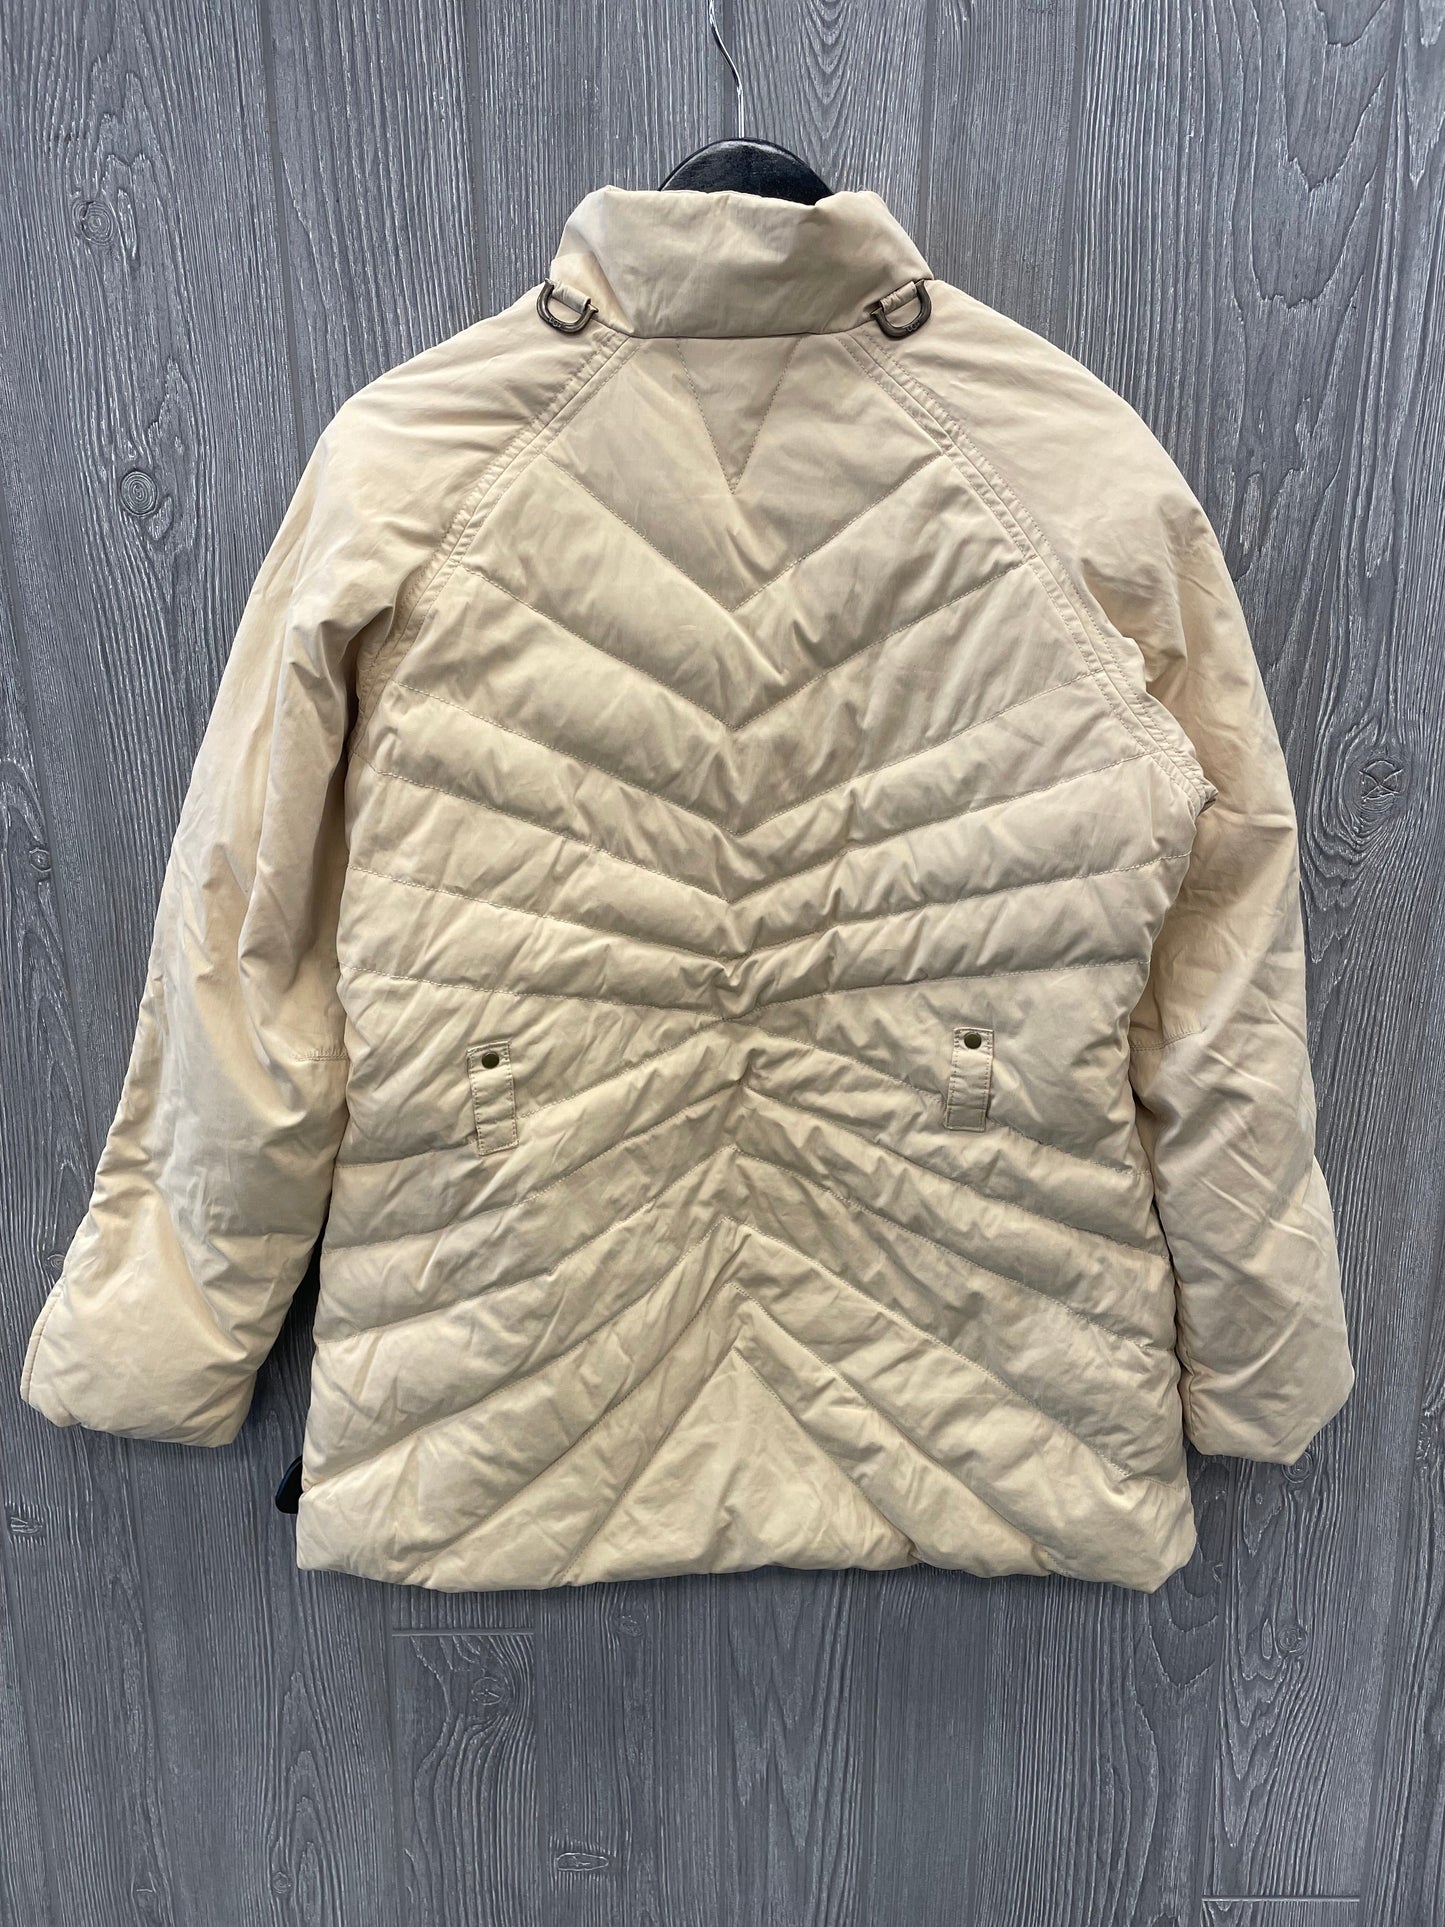 Coat Puffer & Quilted By Ugg  Size: L